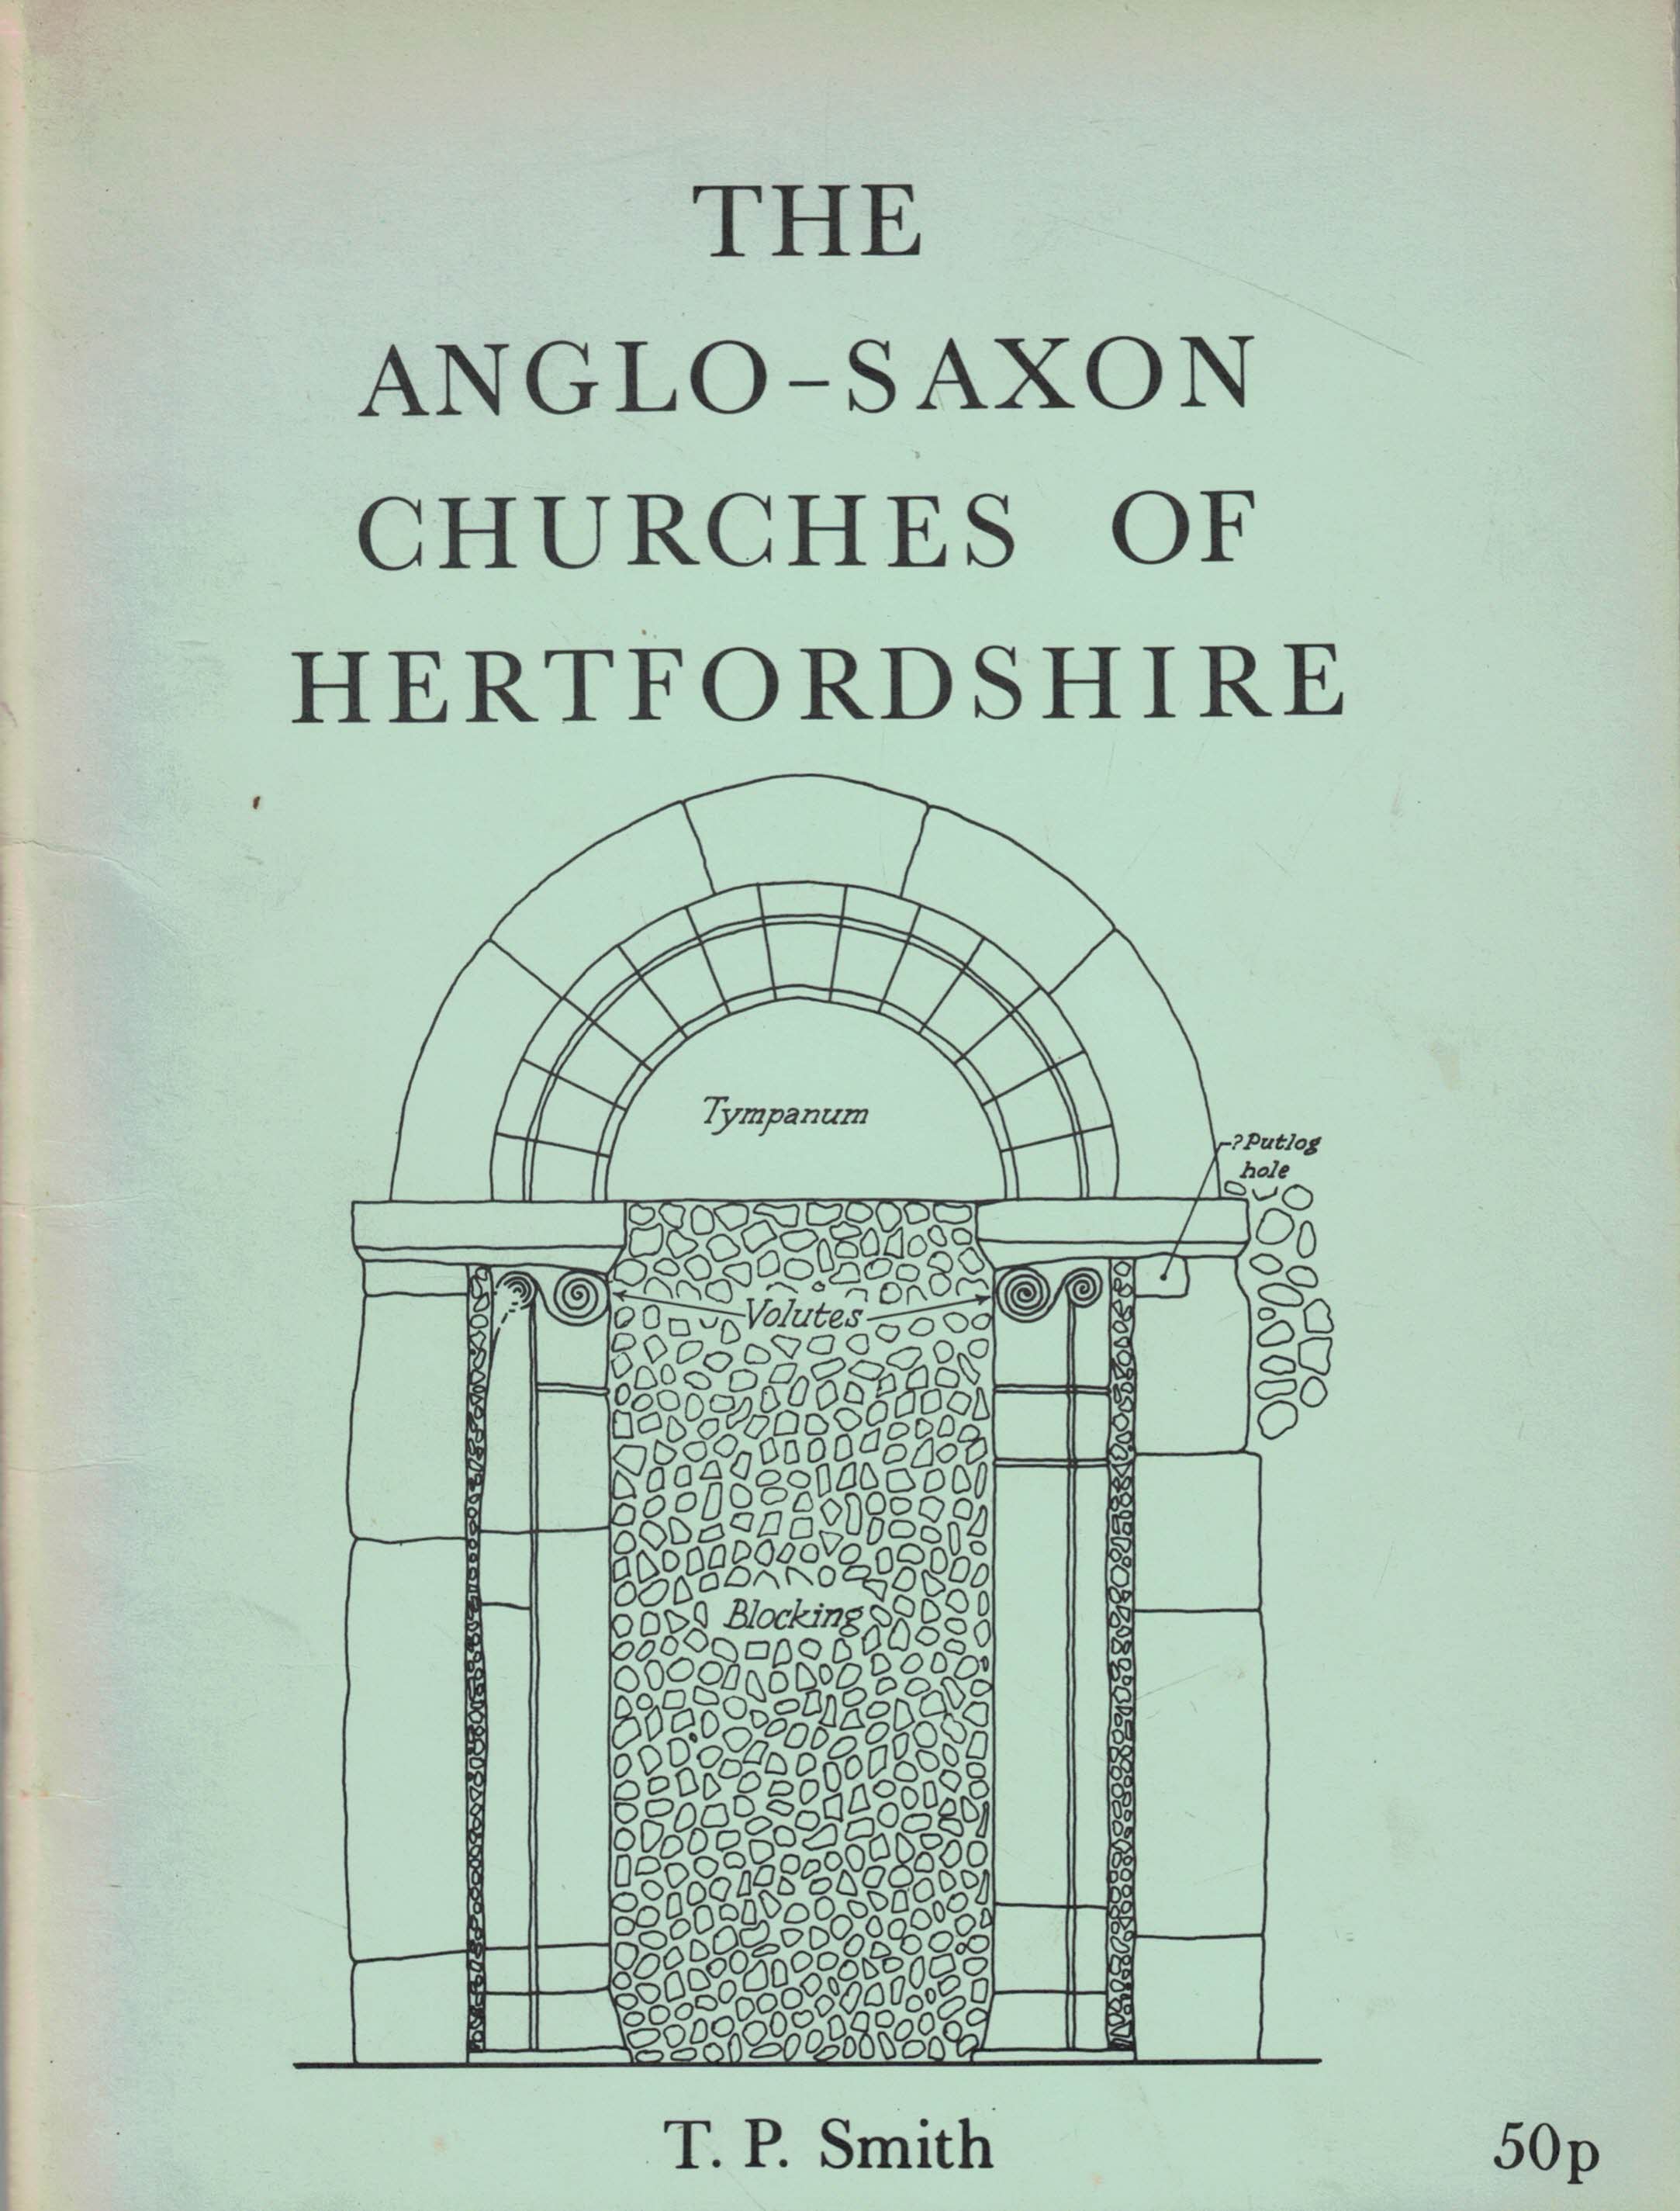 The Anglo-Saxon Churches of Hertfordshire